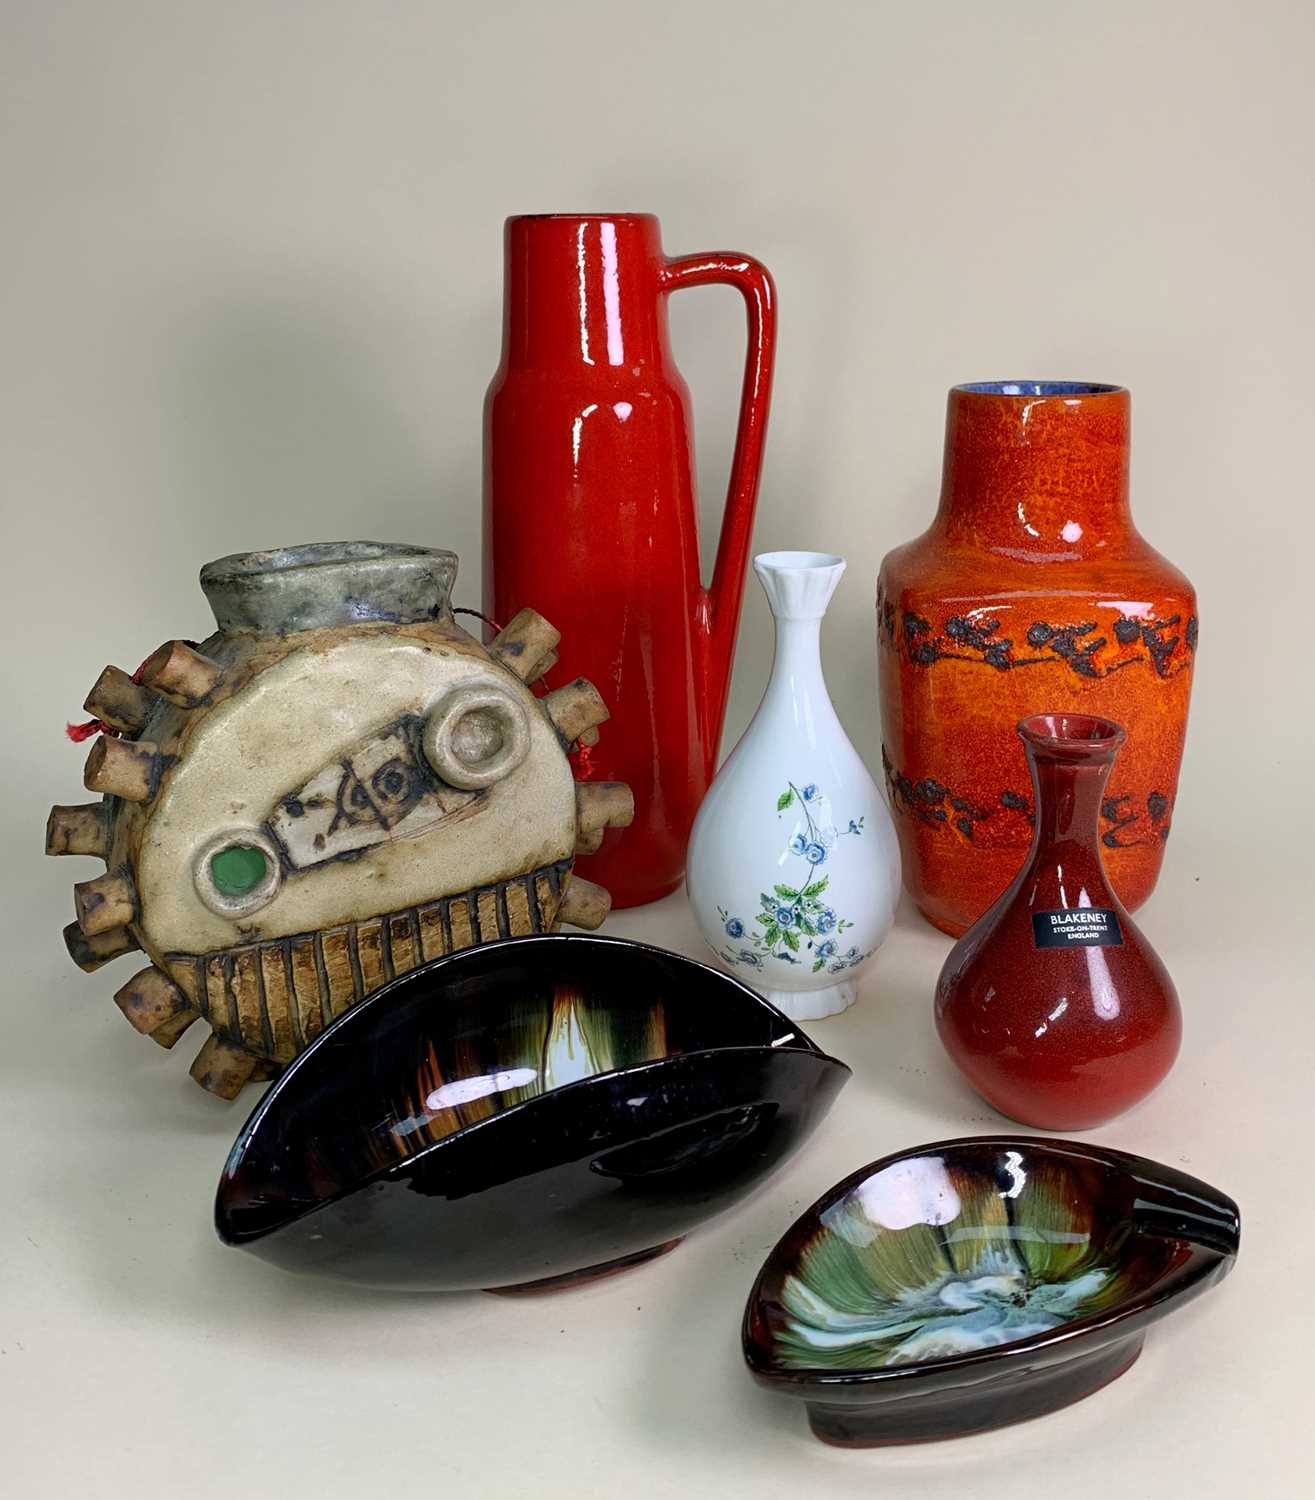 MID CENTURY POTTERY WGP KERAMICS COLLECTION including one Scheurich 275-28 solid red glazed vase